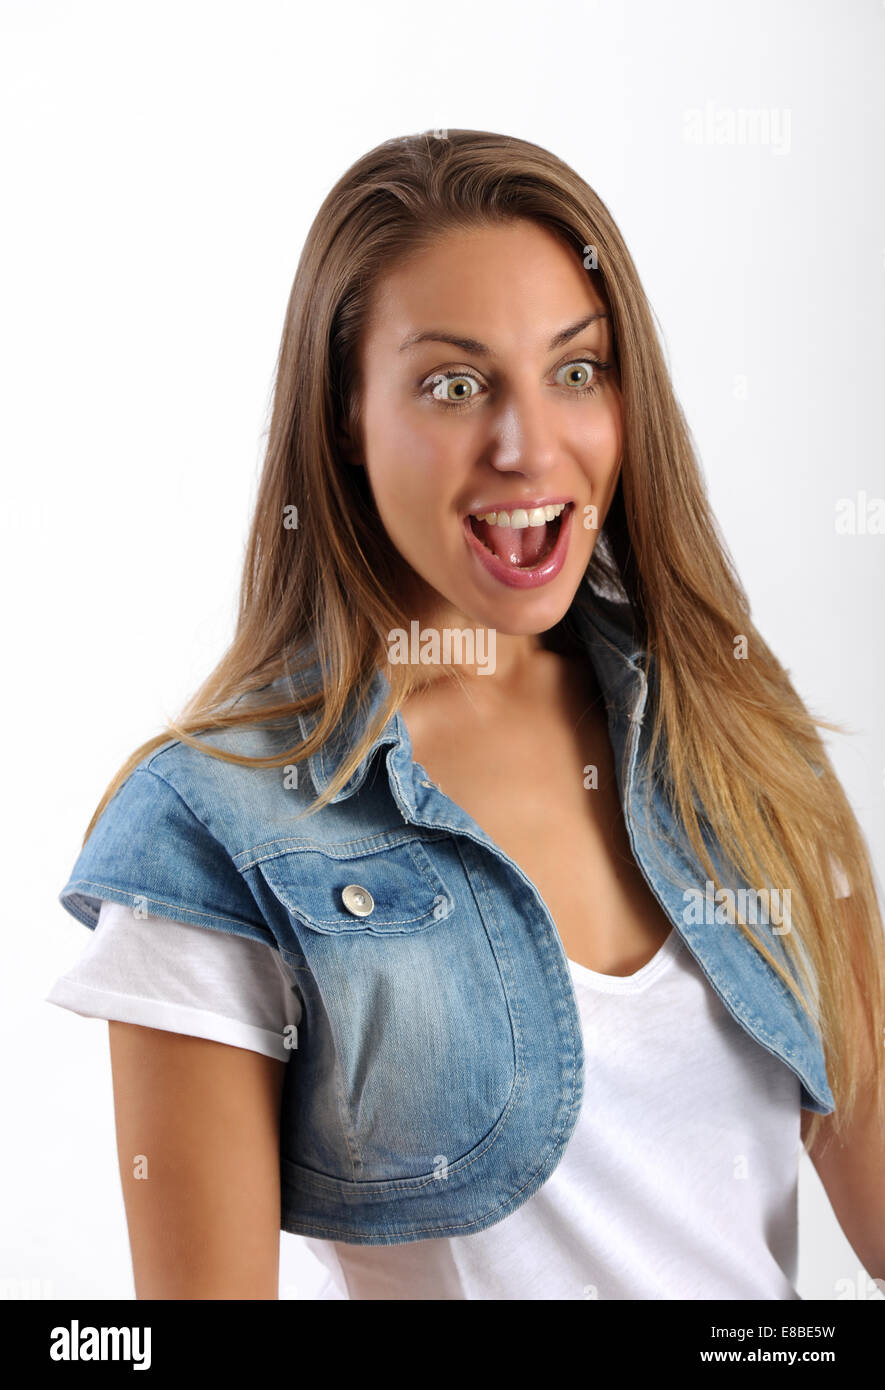 Young woman with a look of excited amazement Stock Photo